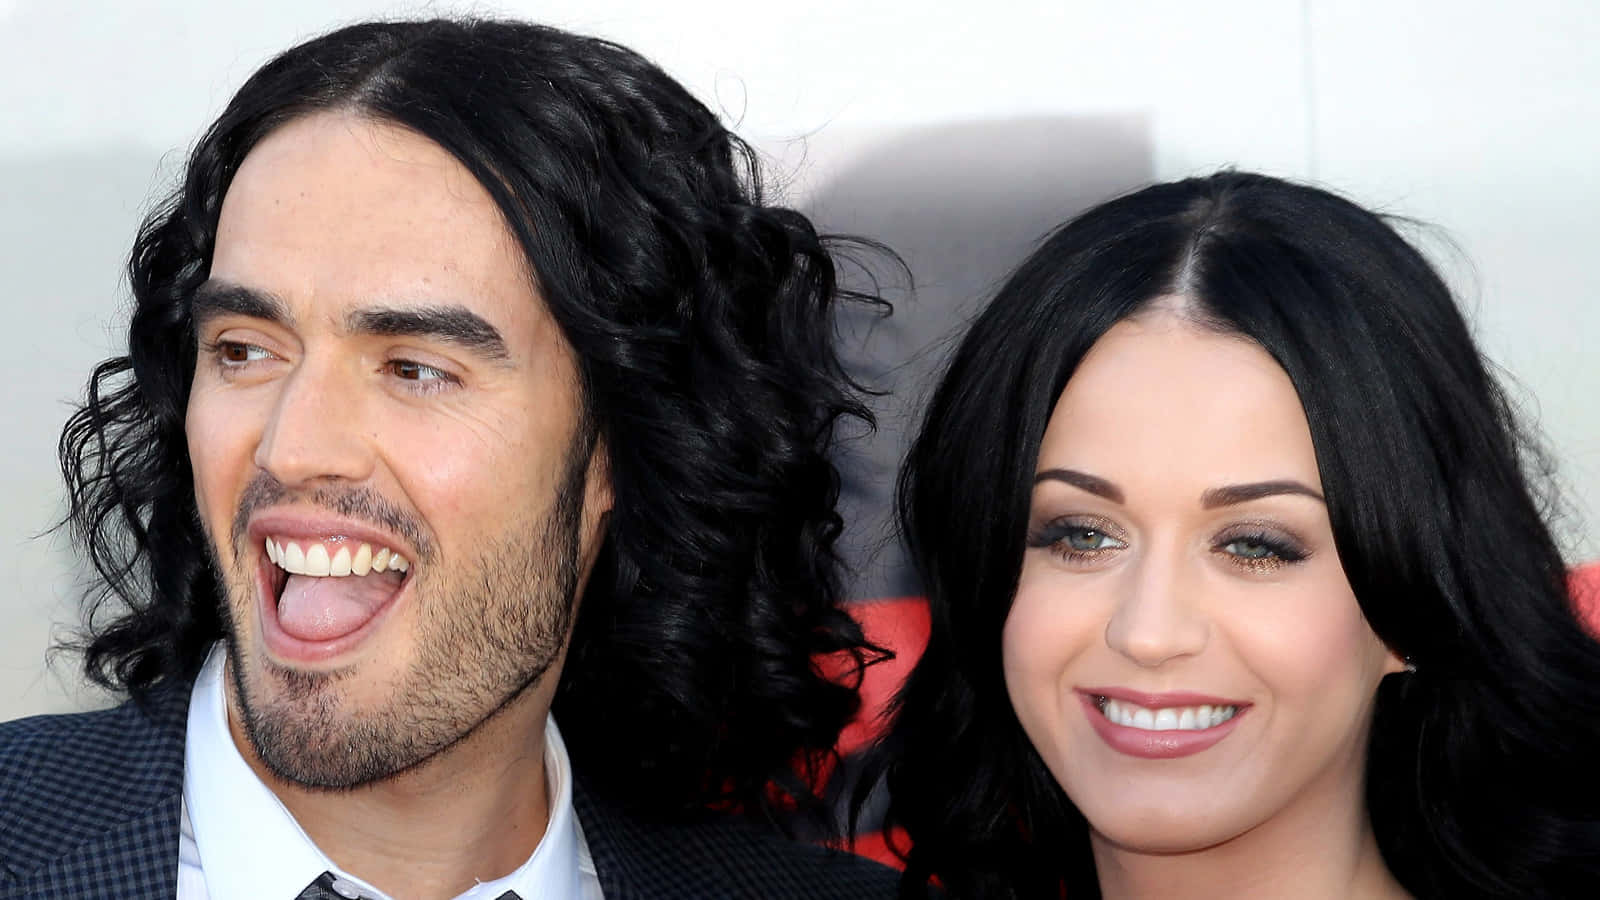 Russellbrand Mit Katy Perry Wallpaper